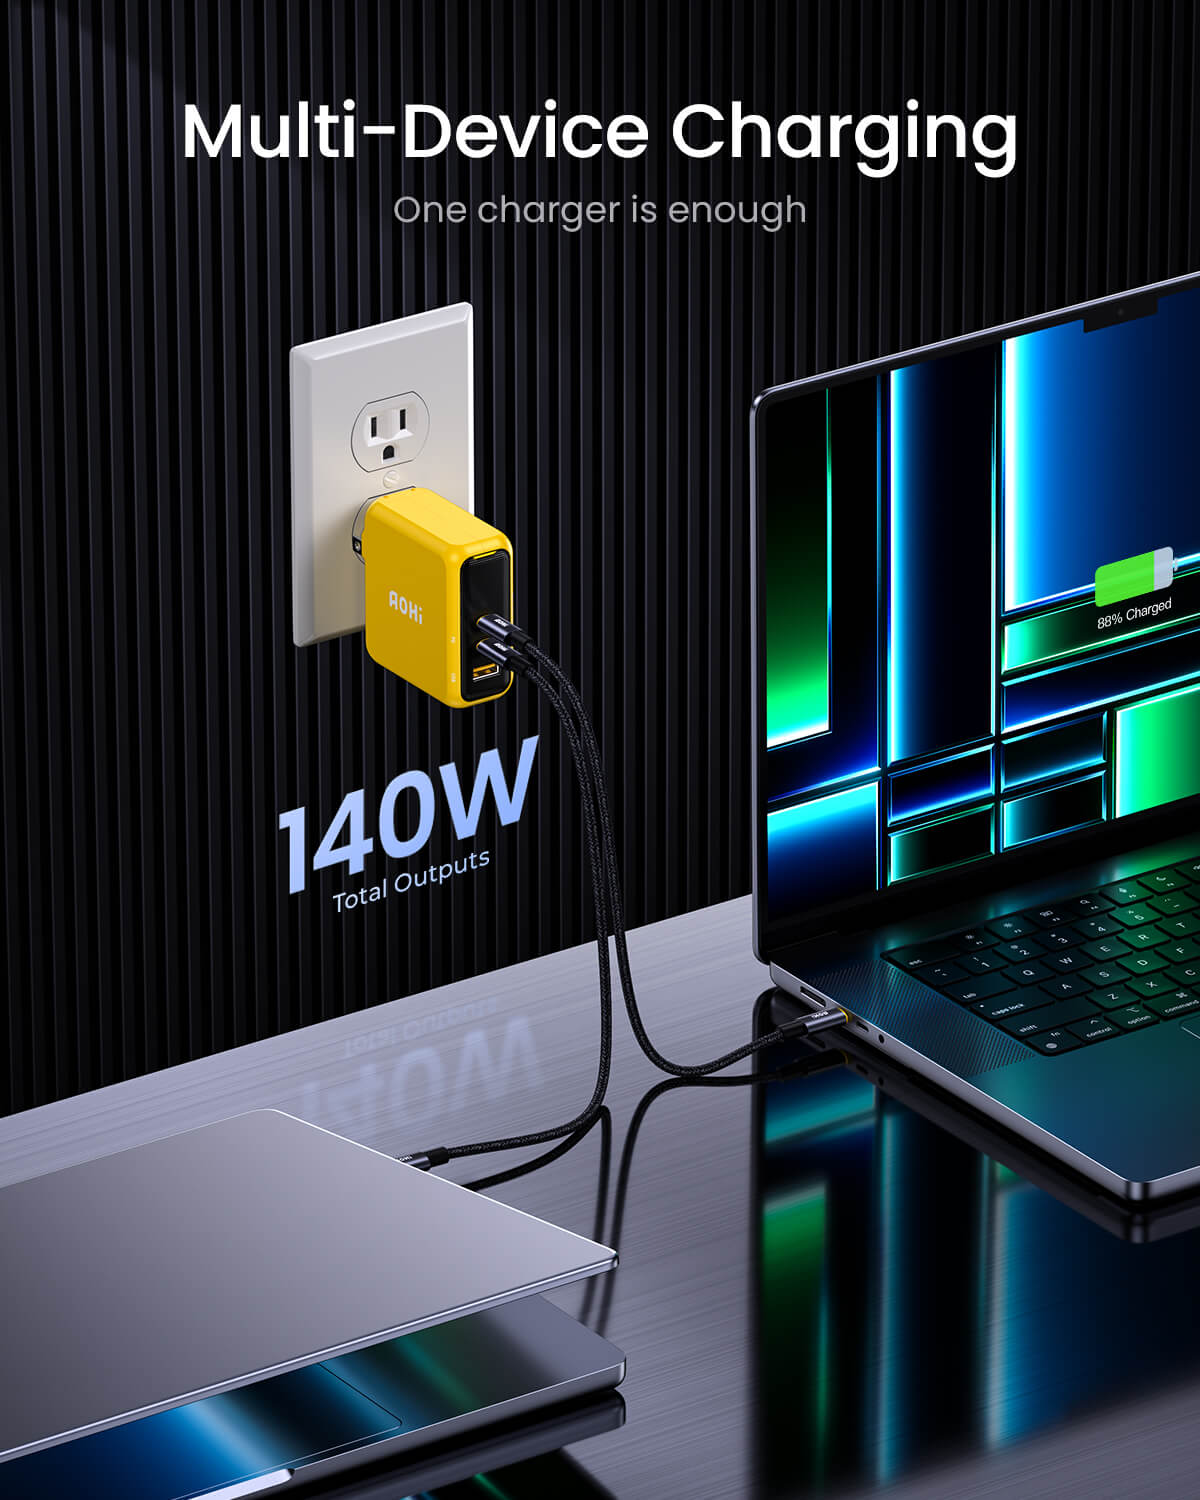 AOHI Magcube 140W GaN+ Fast Charger with 240W Future Power Cable Set (Rubber) - AOHi